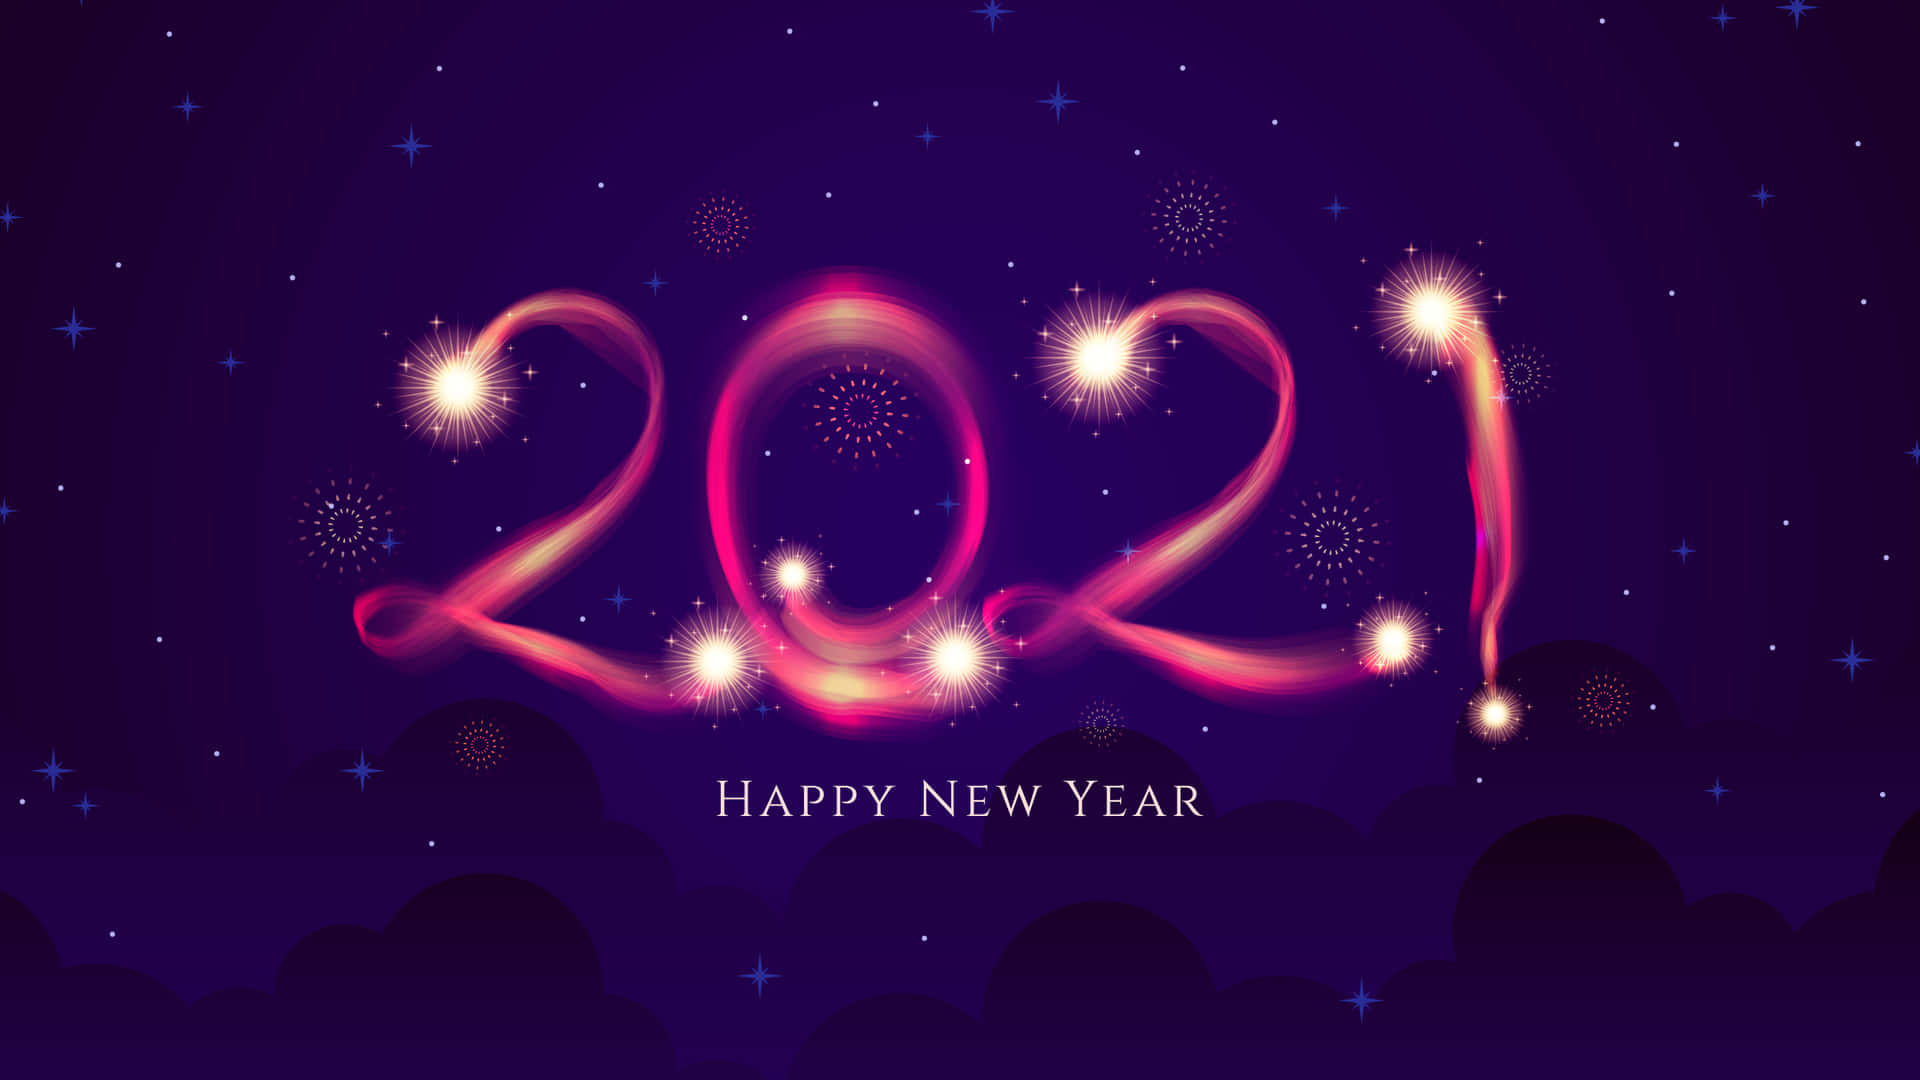 2021 Happy New Year Glowing Numbers Wallpaper